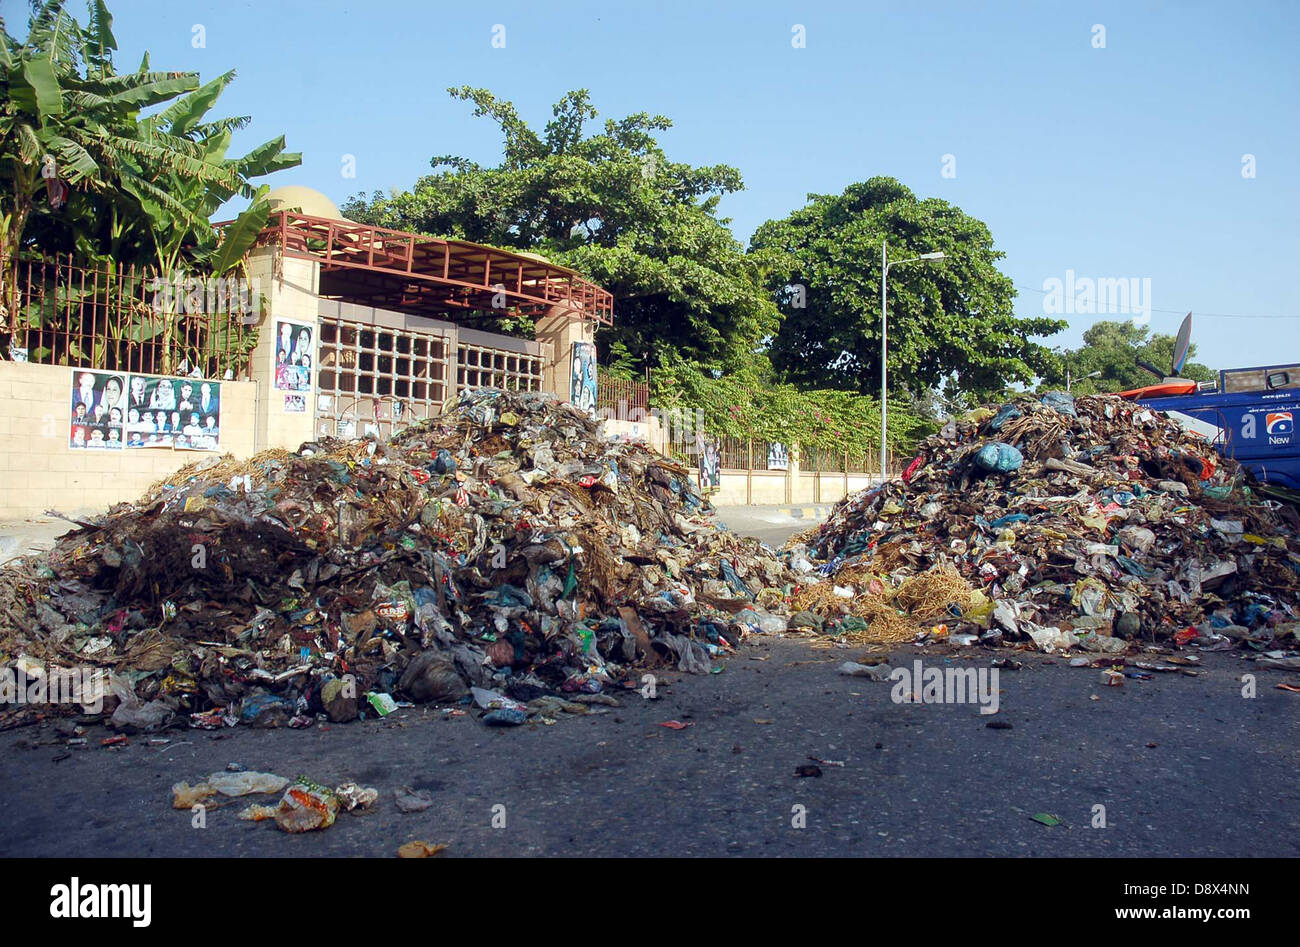 employees-of-the-municipal-corporation-dumped-heaps-of-garbage-outside-D8X4NN.jpg